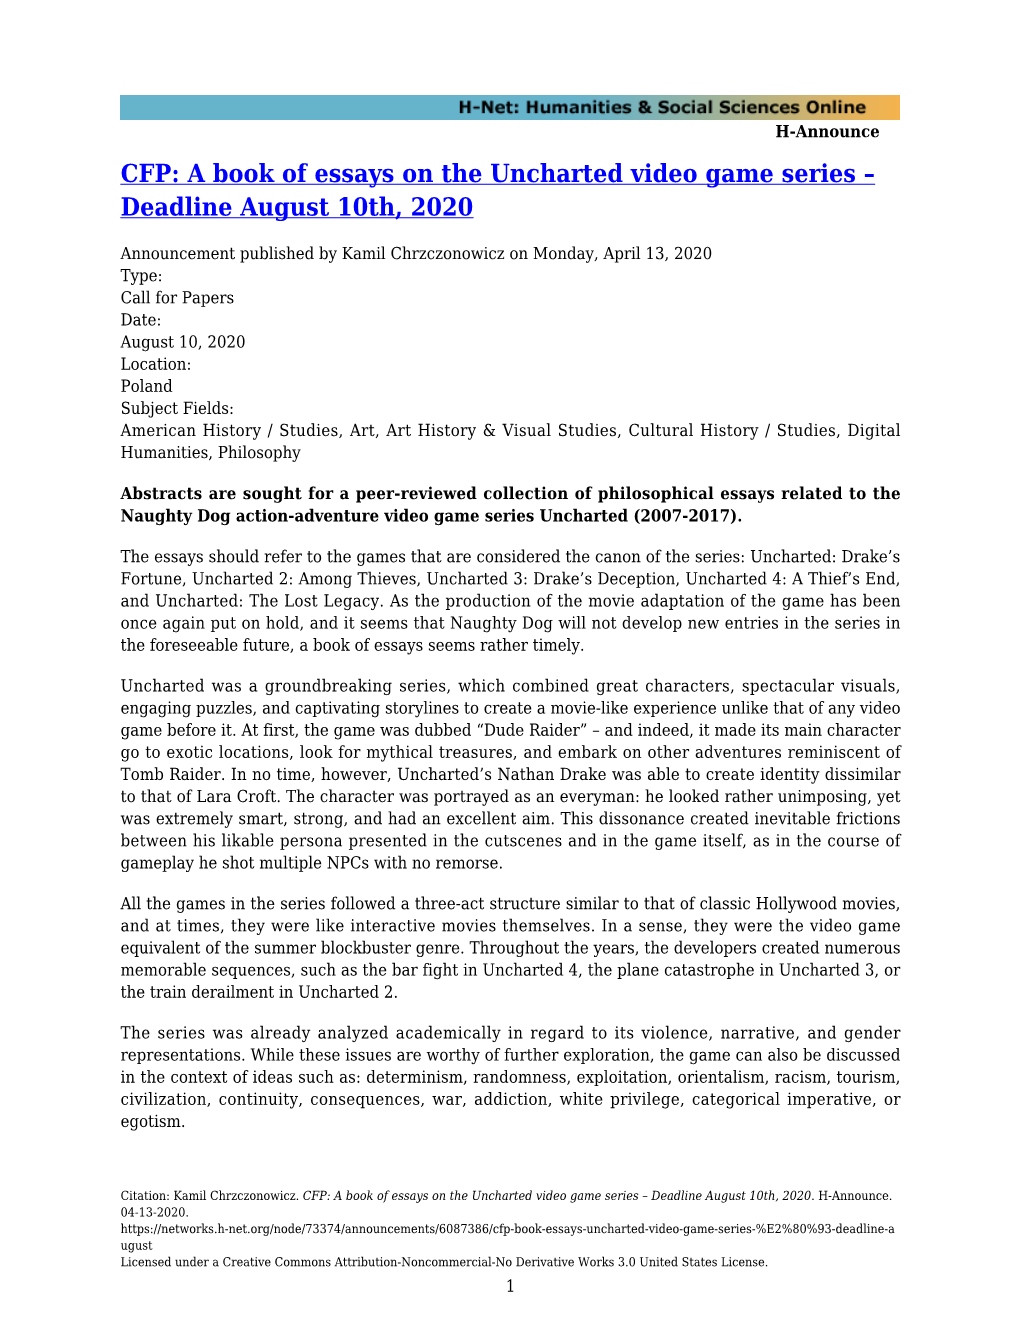 CFP: a Book of Essays on the Uncharted Video Game Series – Deadline August 10Th, 2020